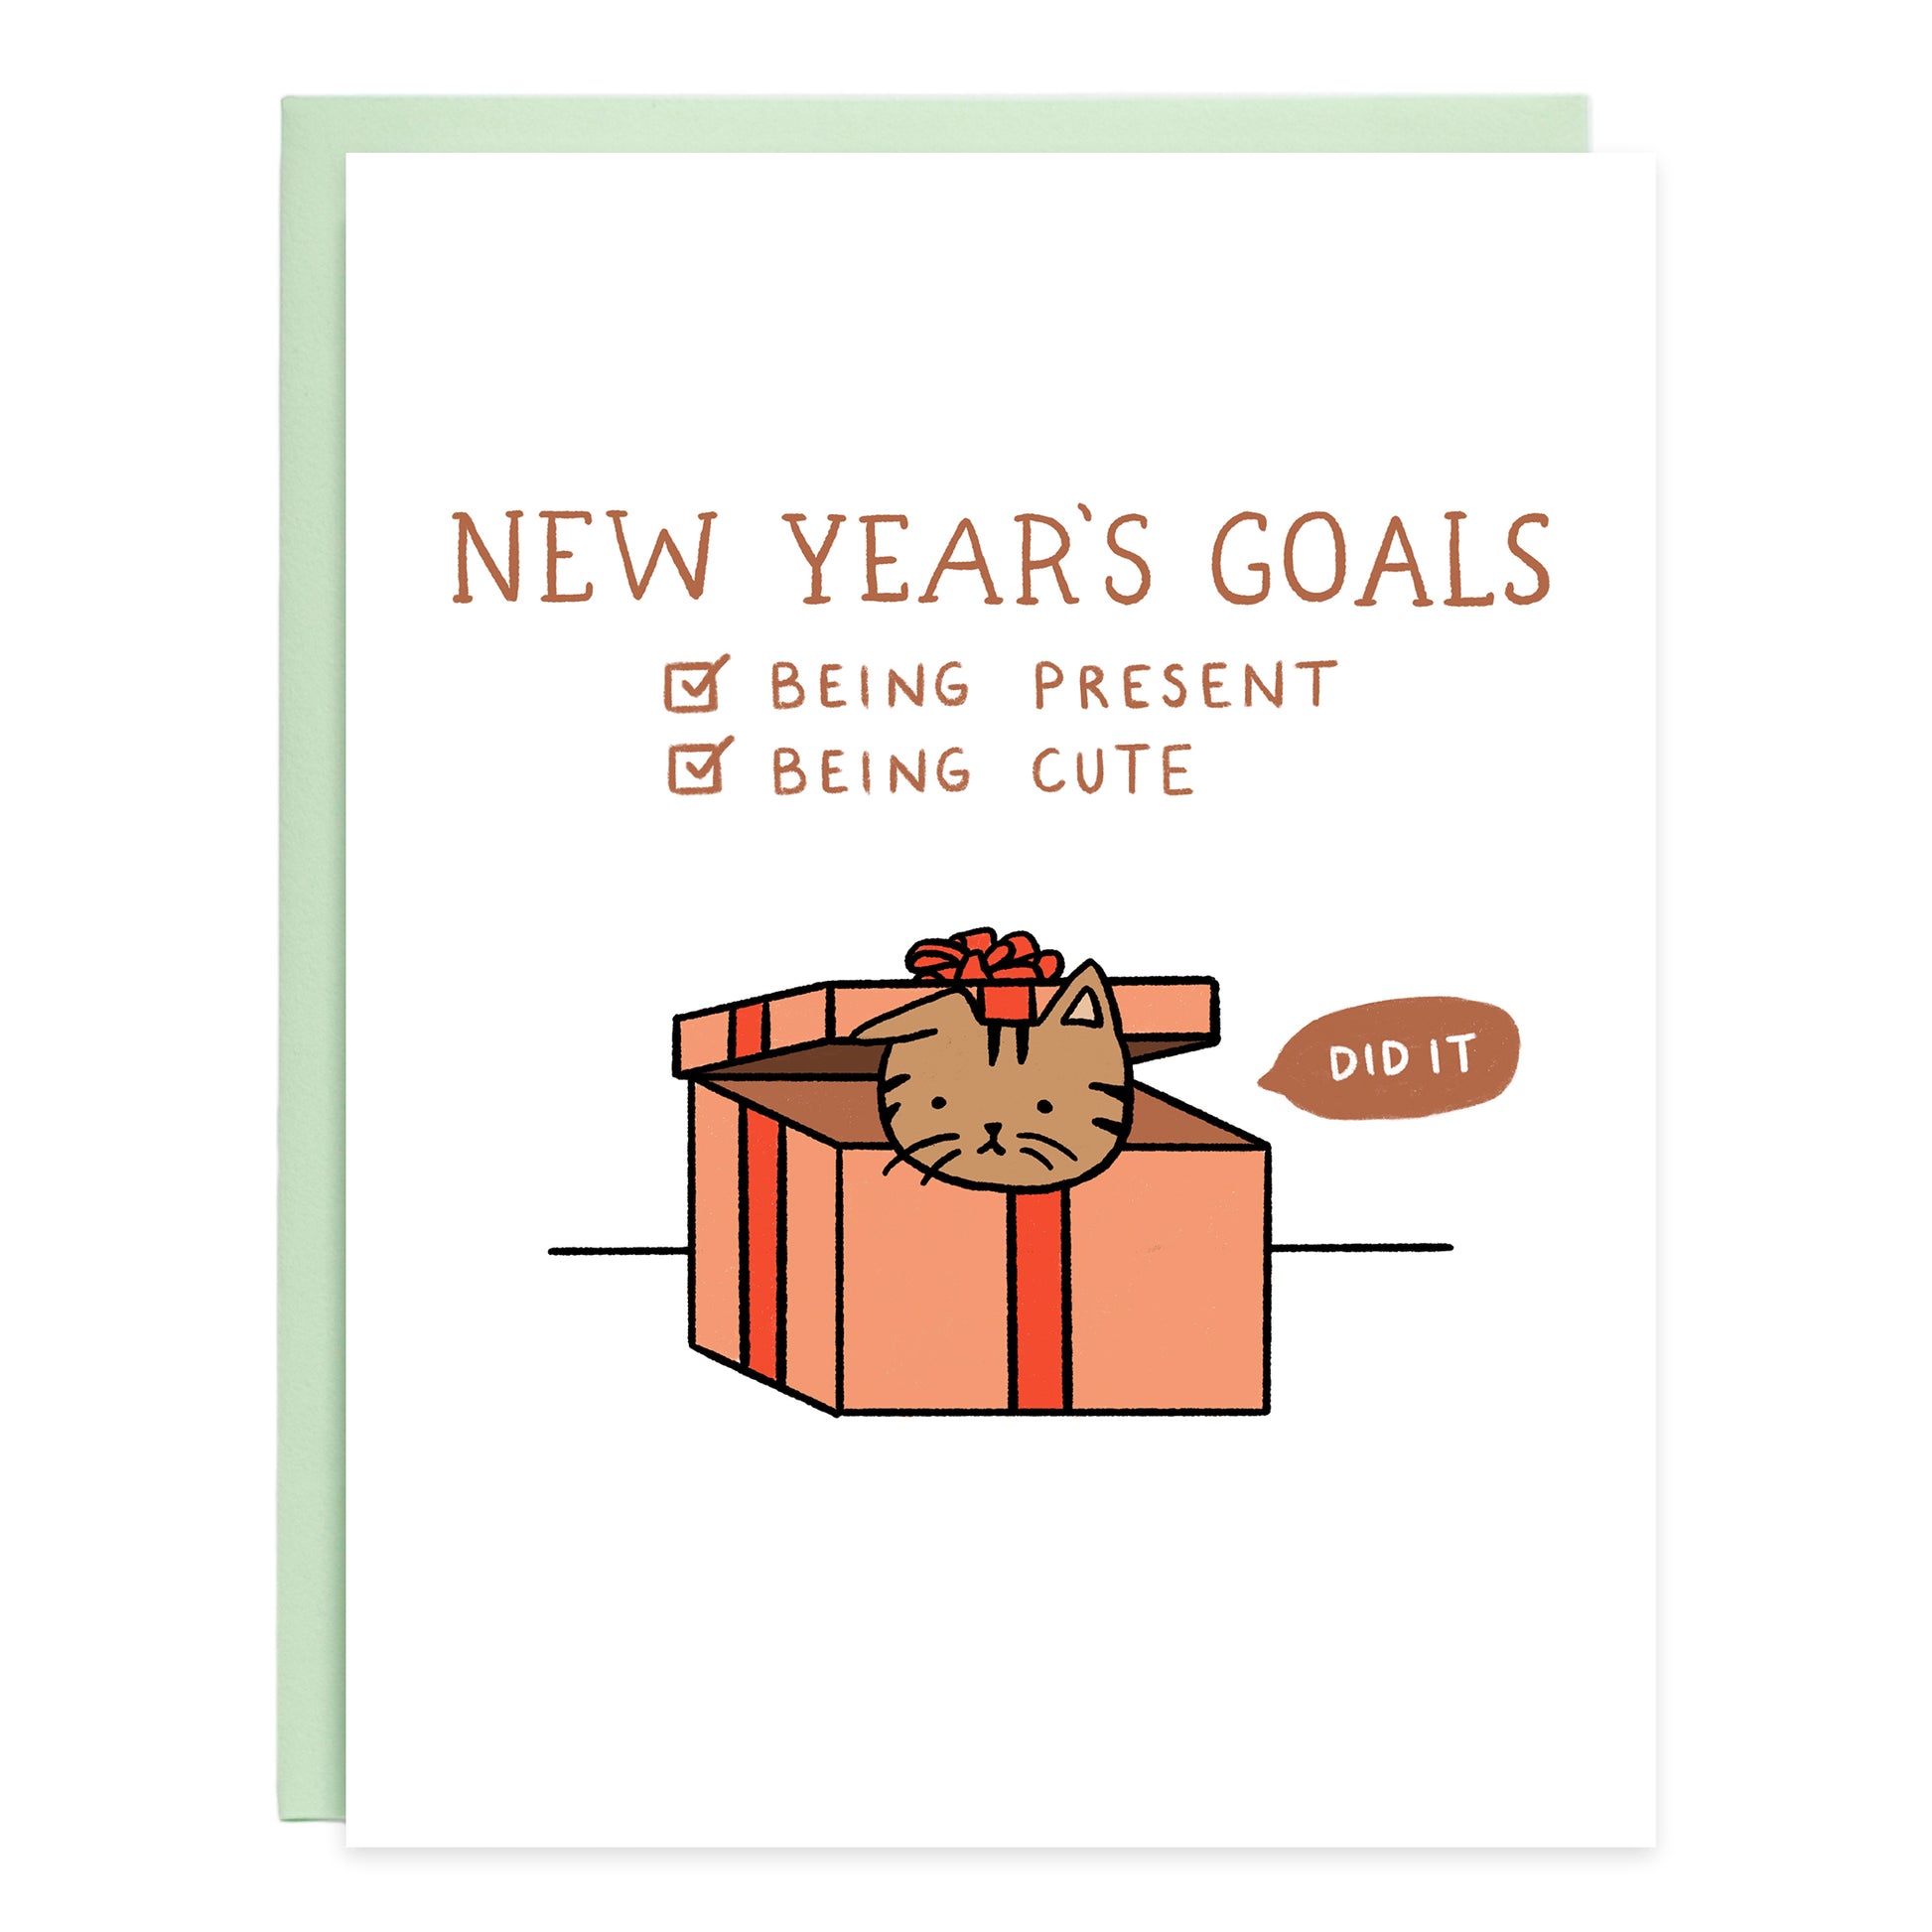 At the top the card reads, New Year's Goals. Underneath is a checklist and the two goals checked off  are being present and being cute. A drawing of a brown tabby cat inside of a red gift box with a quote bubble that says, did it